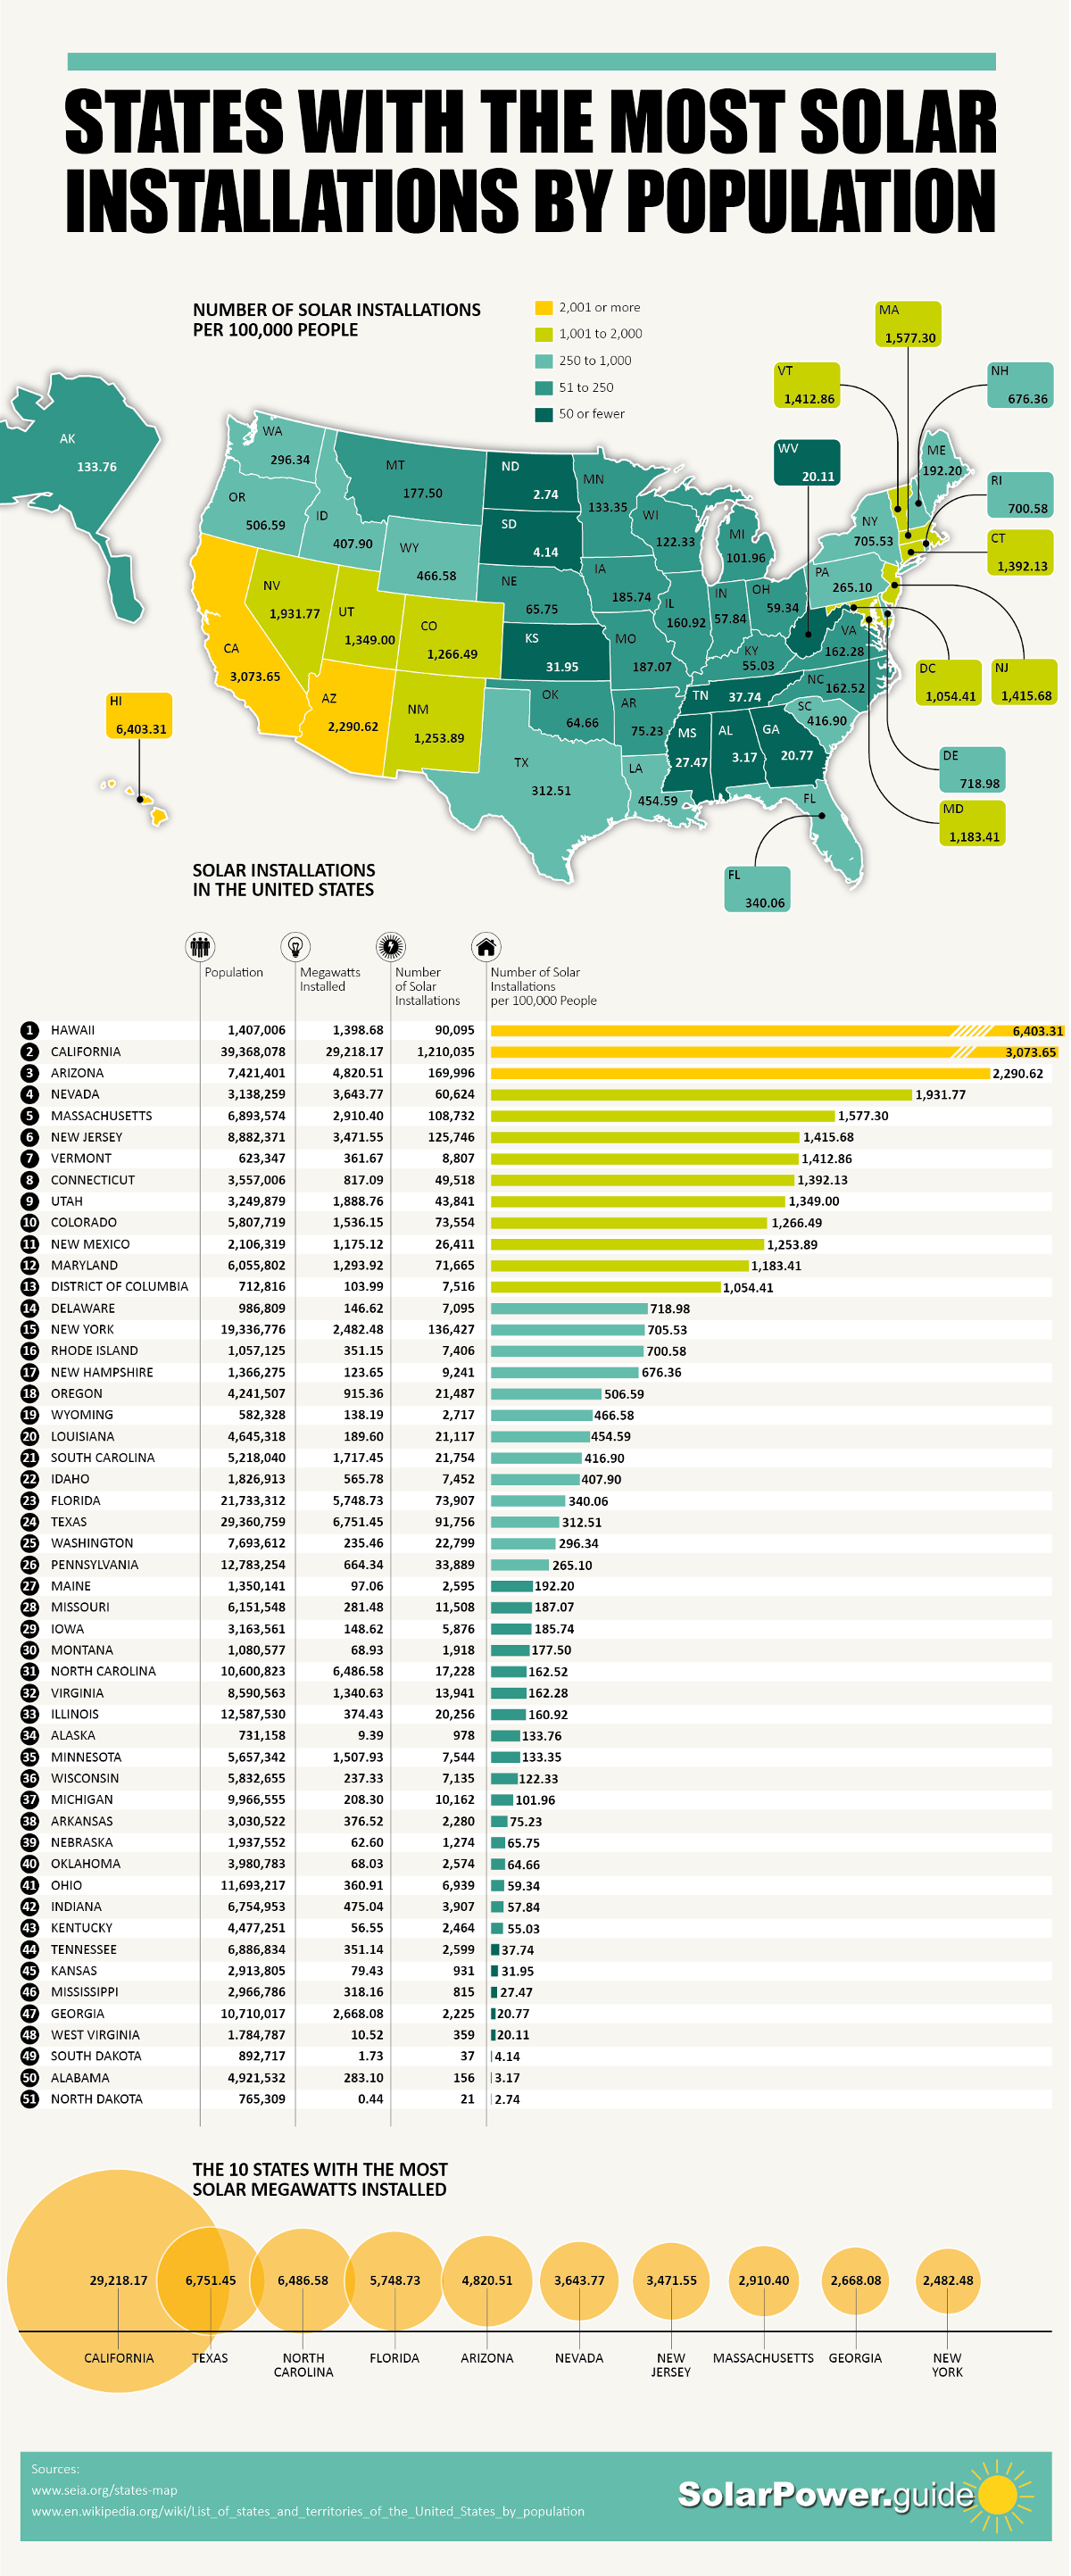 States With the Most Solar Installation by Population - Solar Power Guide - Infographic